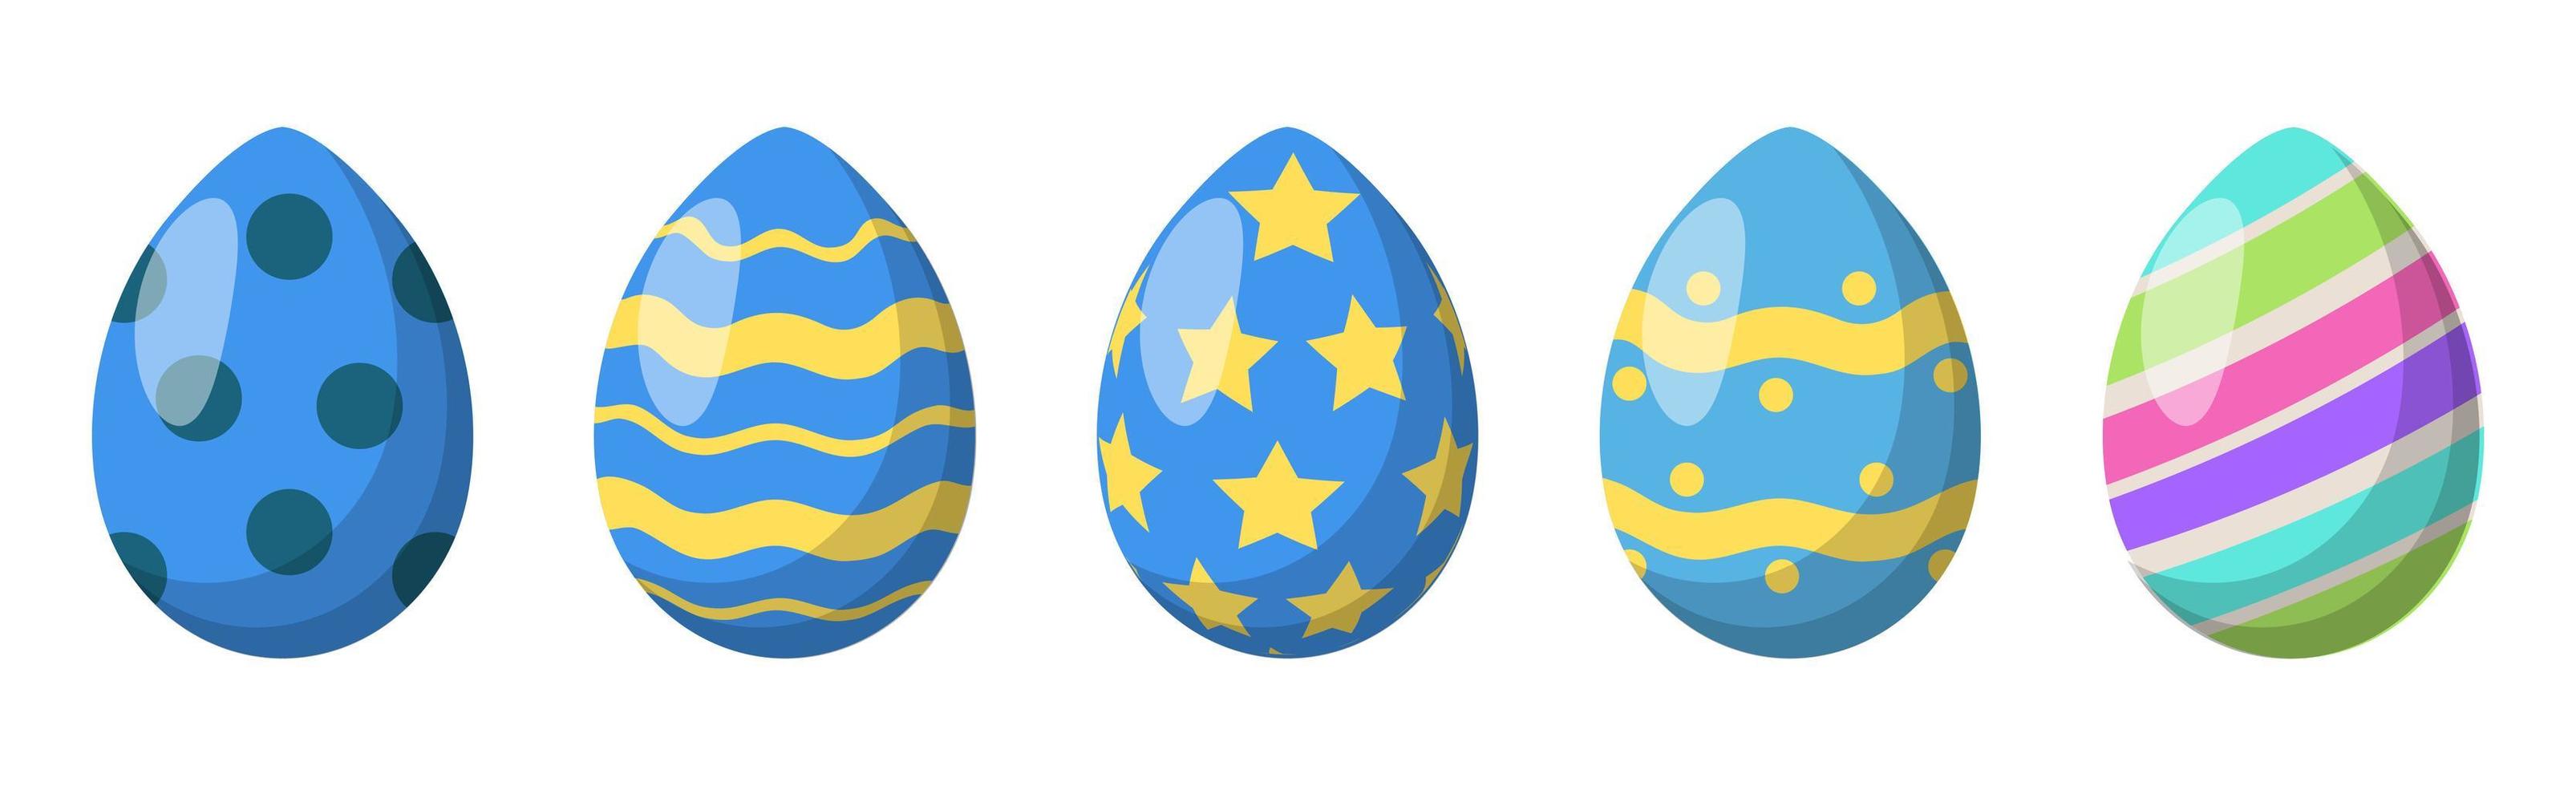 Set of 5 different colorful Easter eggs - Vector